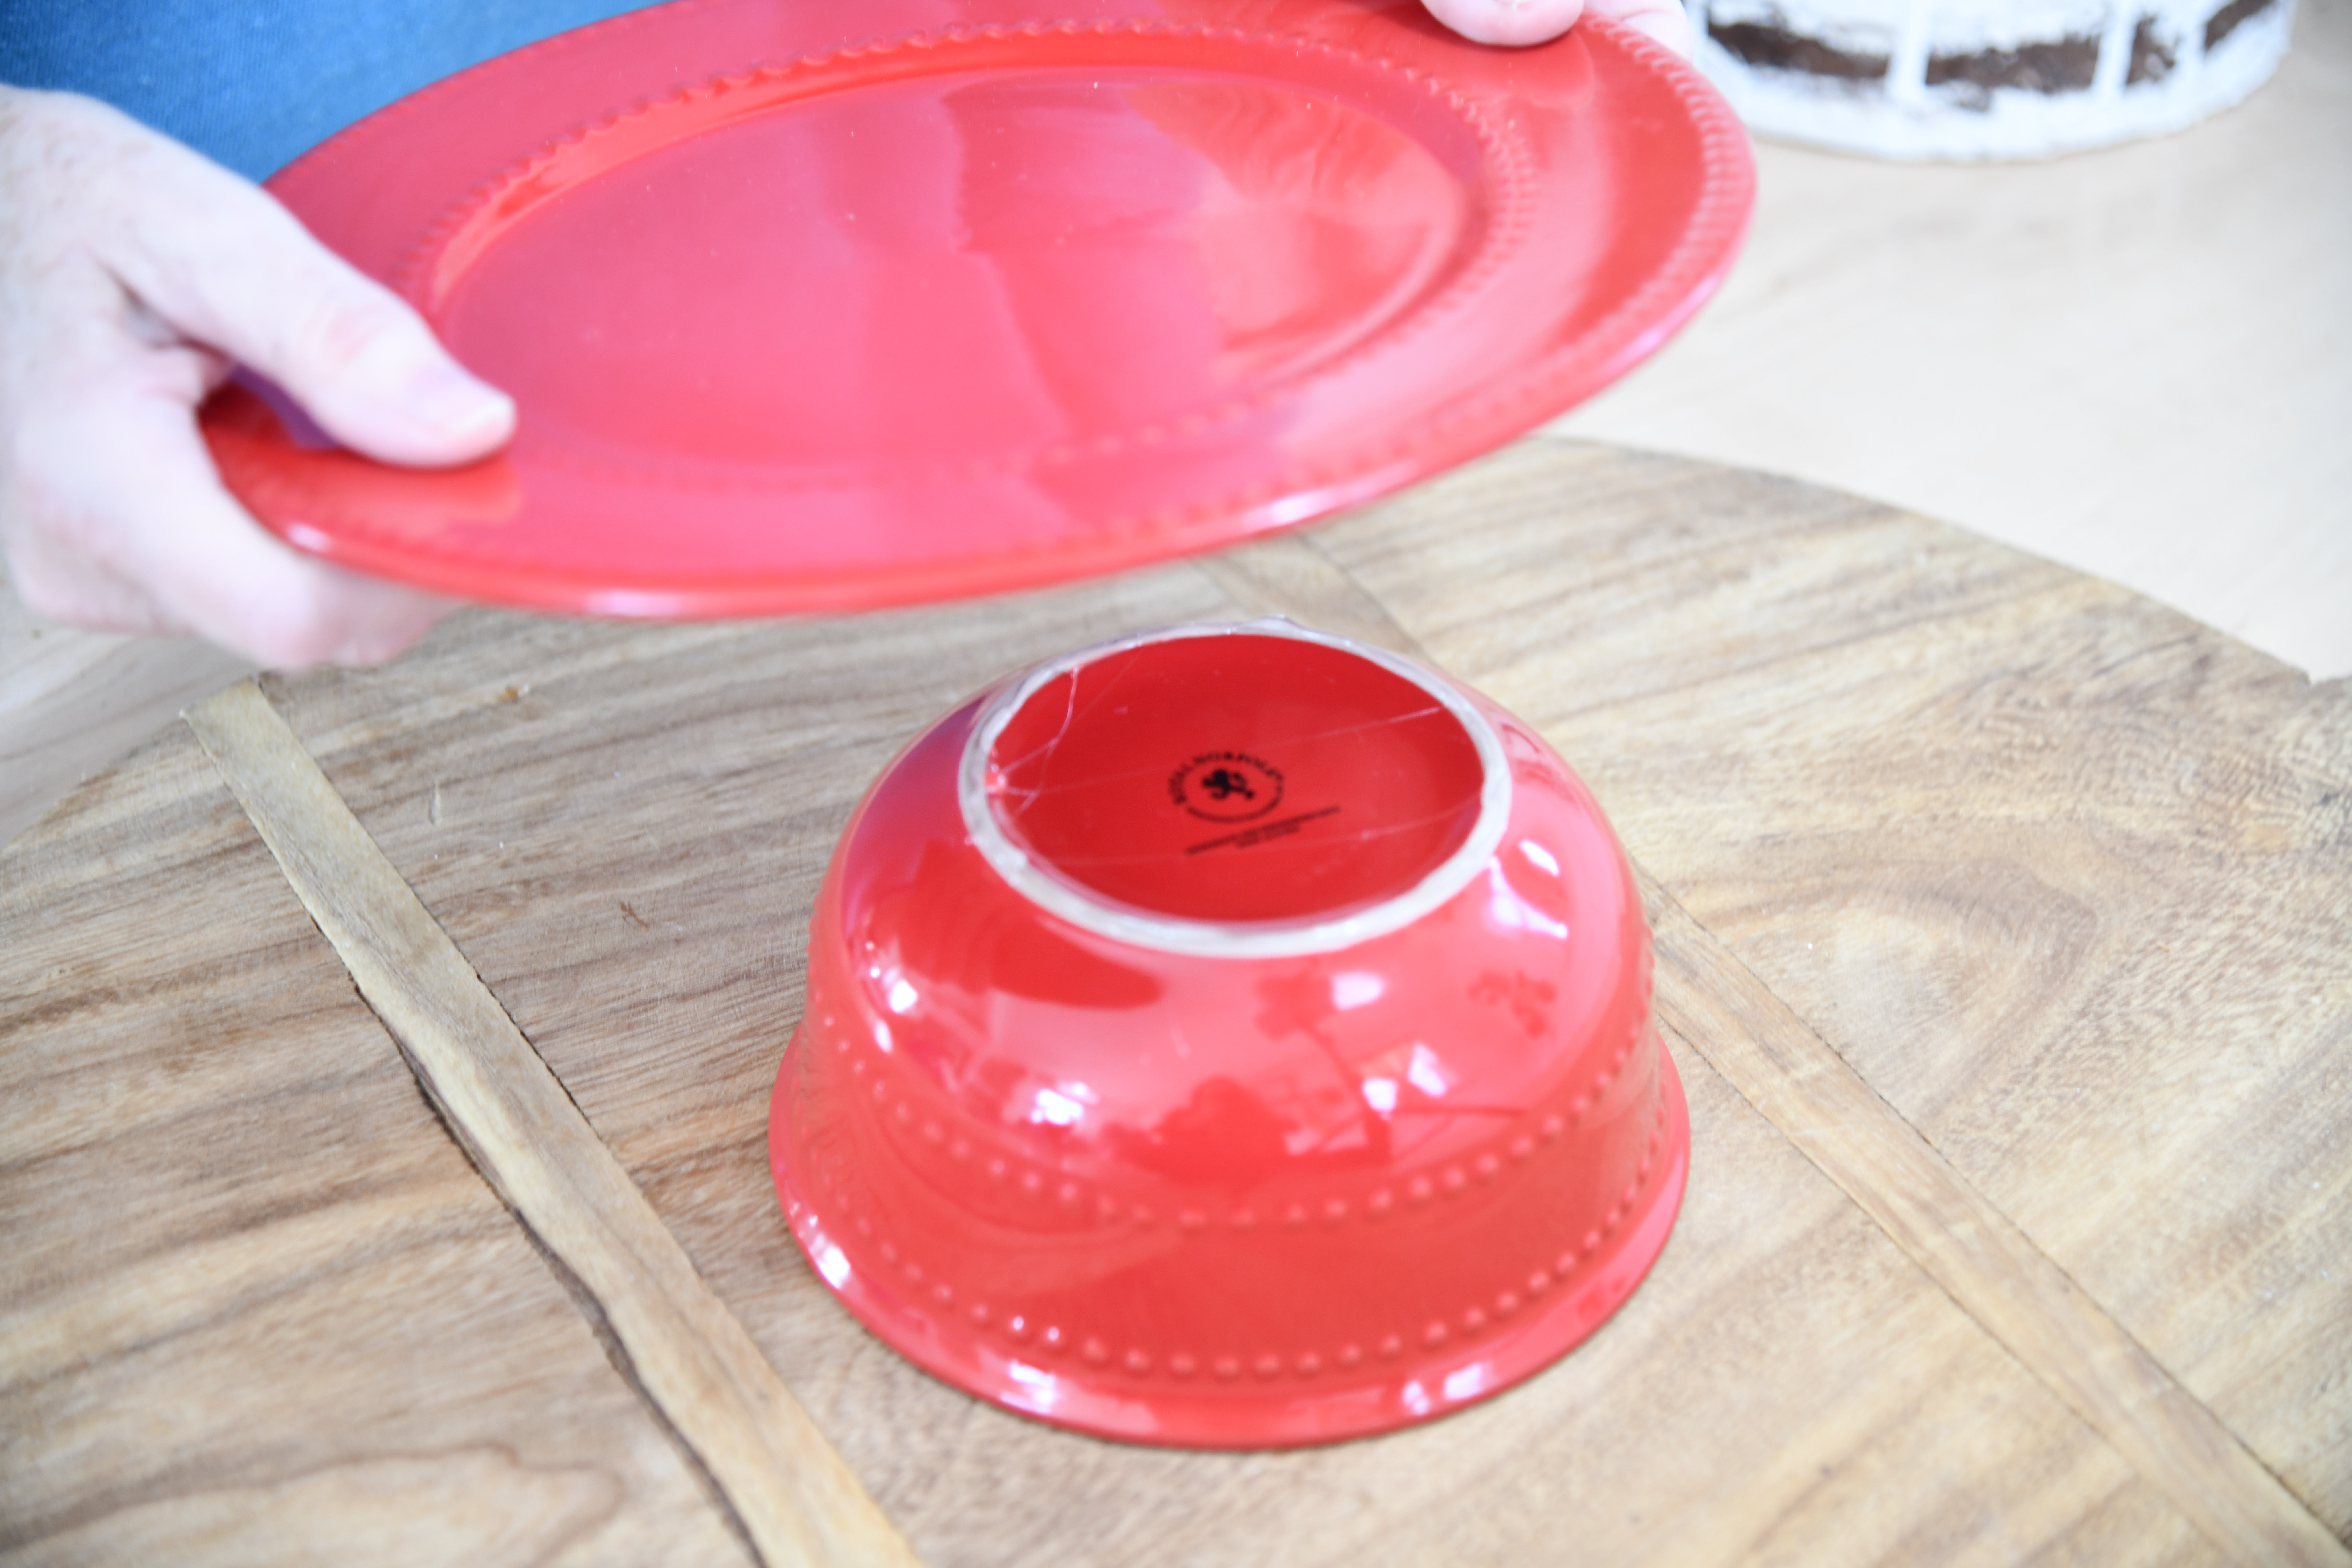 Place Red Plate on top of upside down bowl with glue on ring of bowl